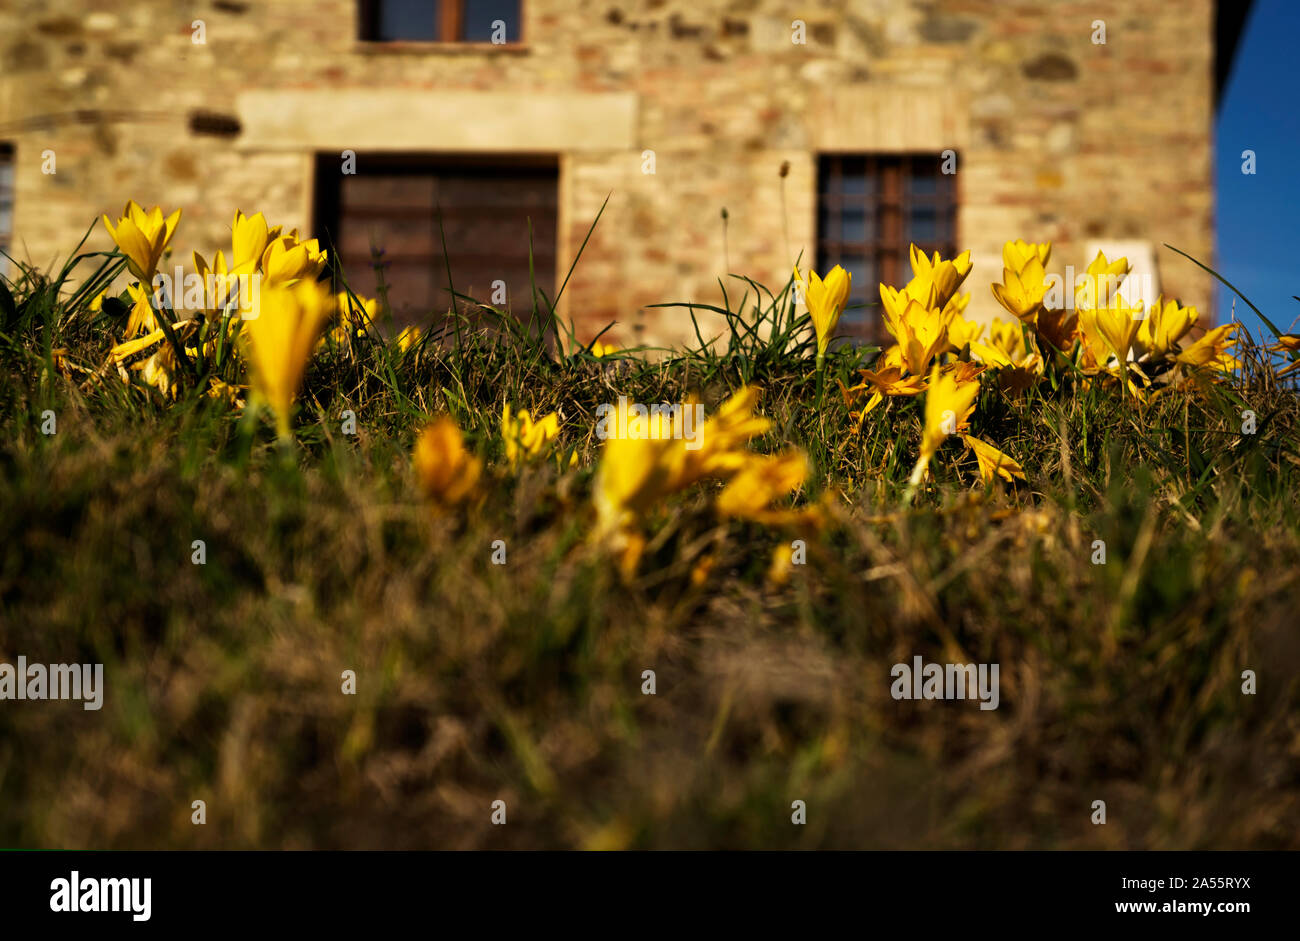 Un old ruin restored in the last years, even places can bloom again. Shoot taken in Gallina province of Siena Stock Photo